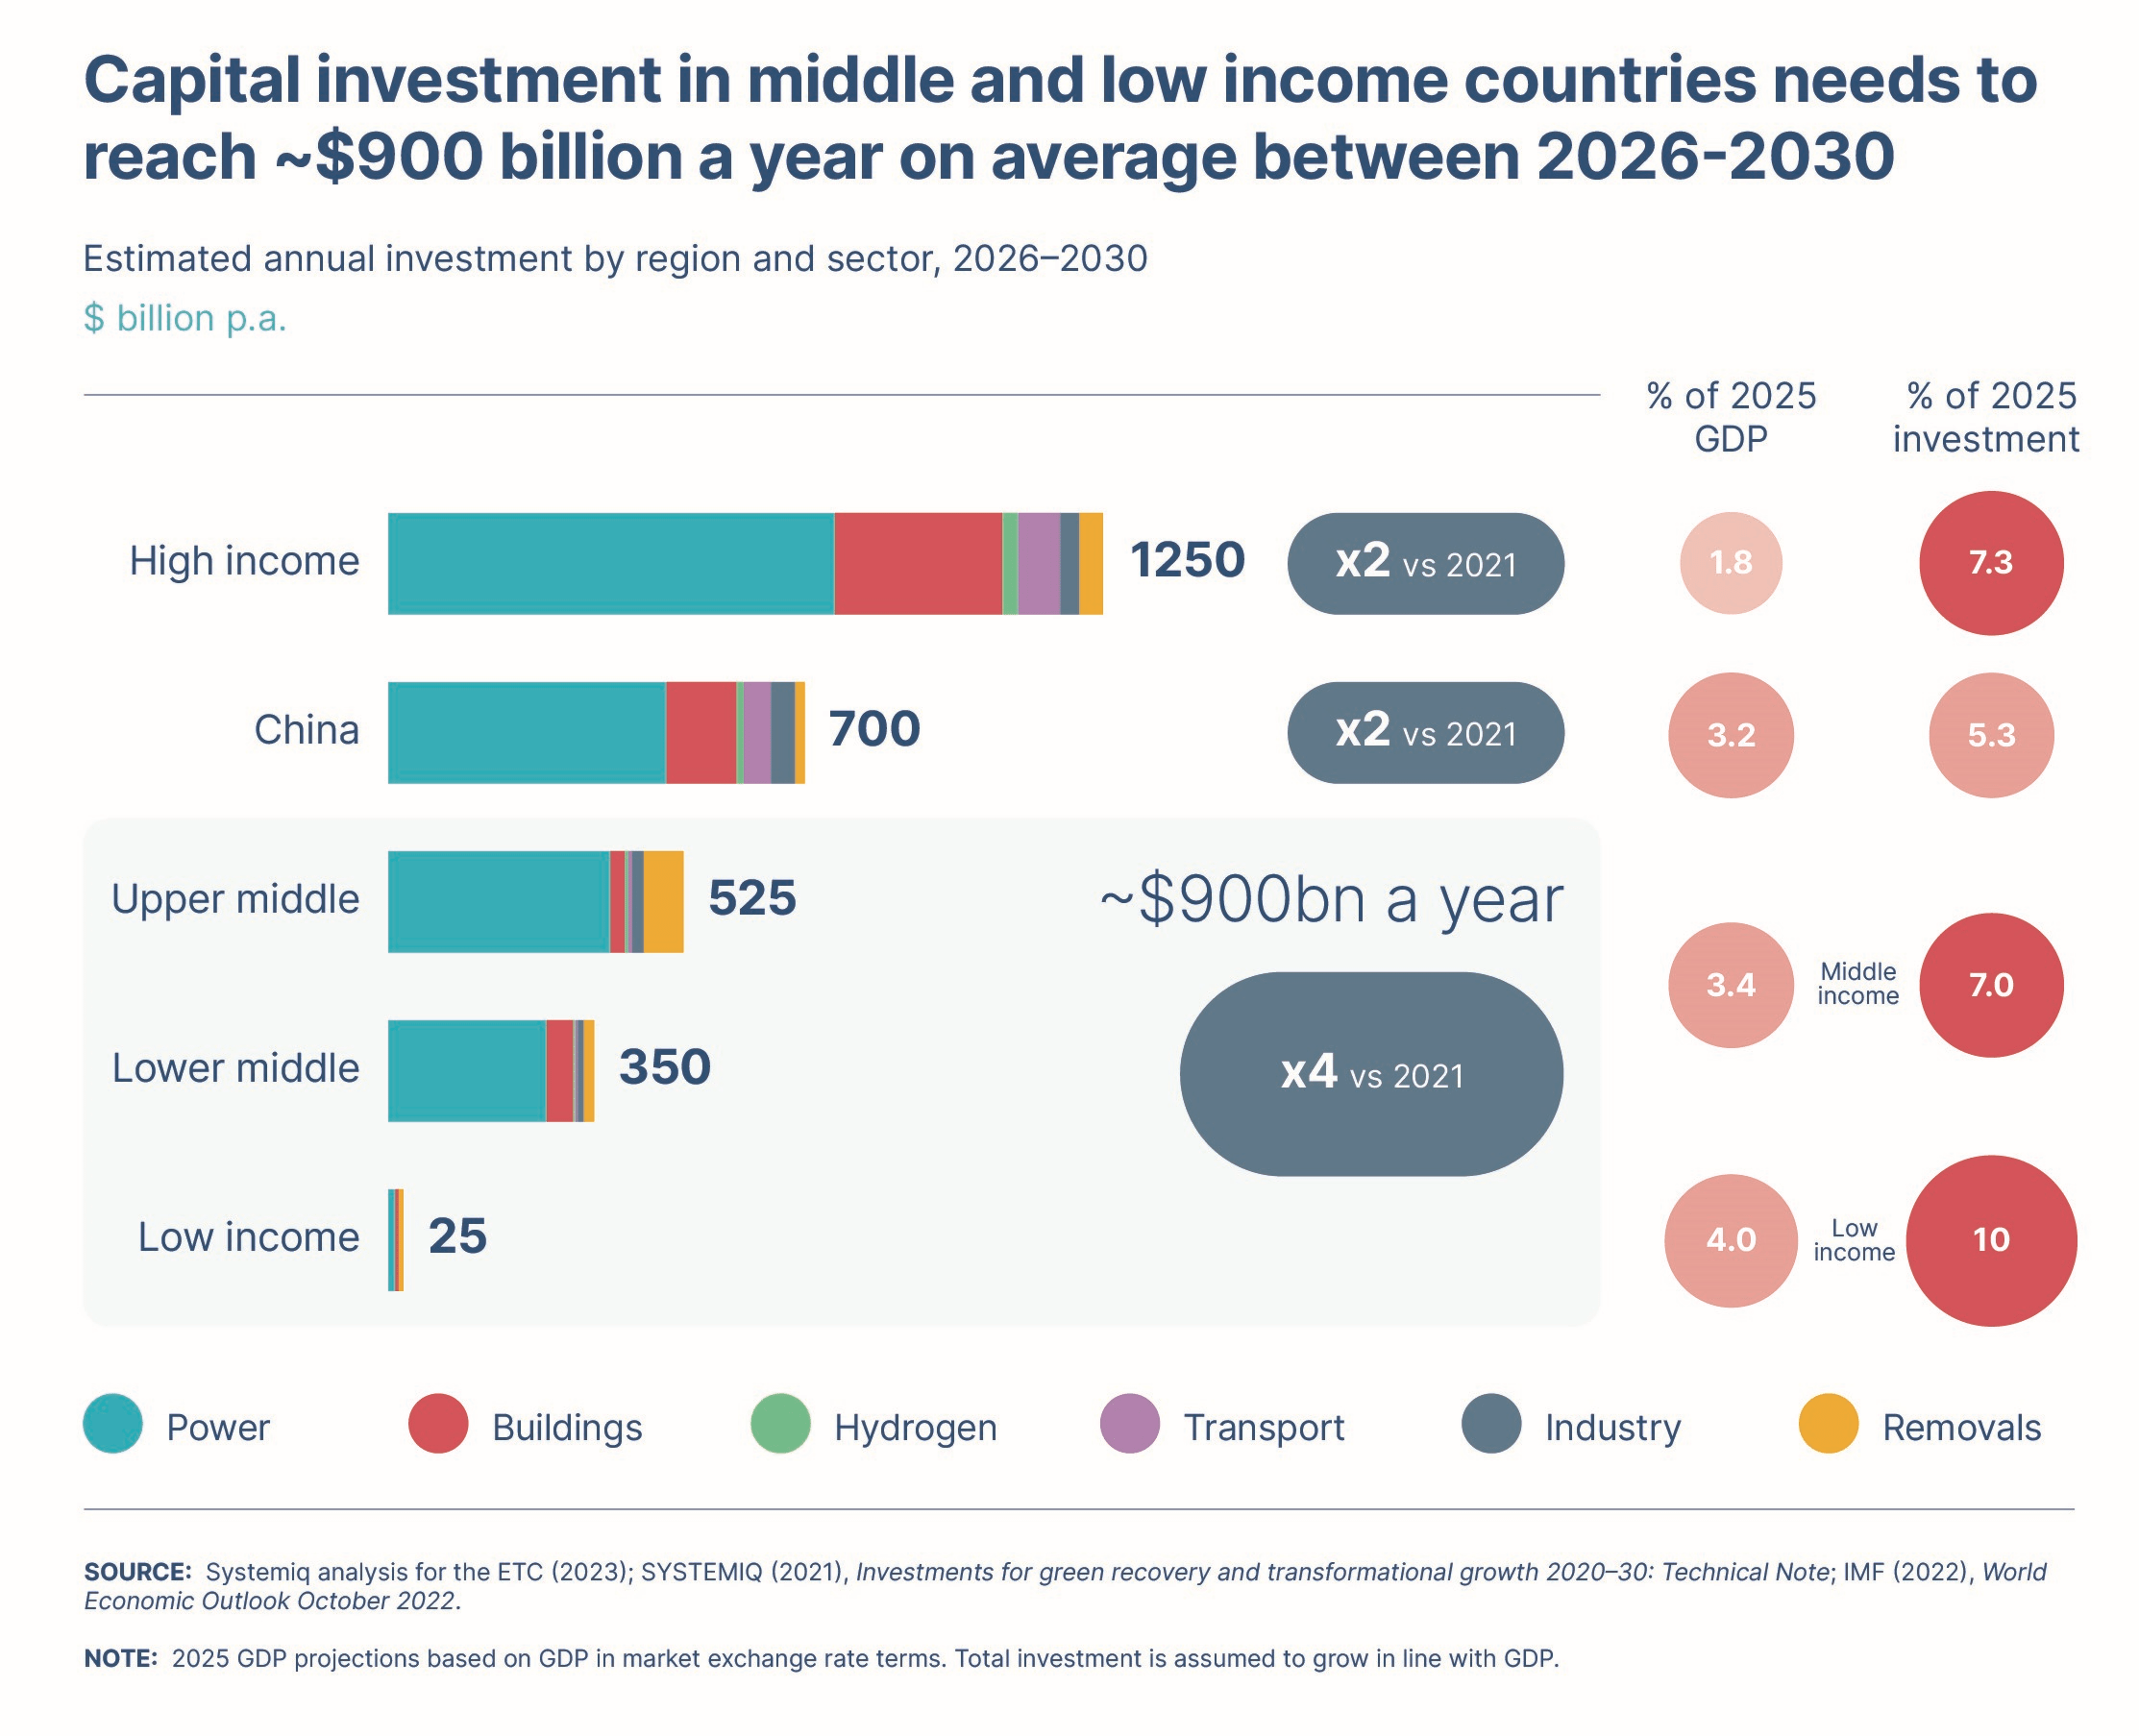 Bar chart showing projected capital investment needs in middle and low income countries for the energy transition